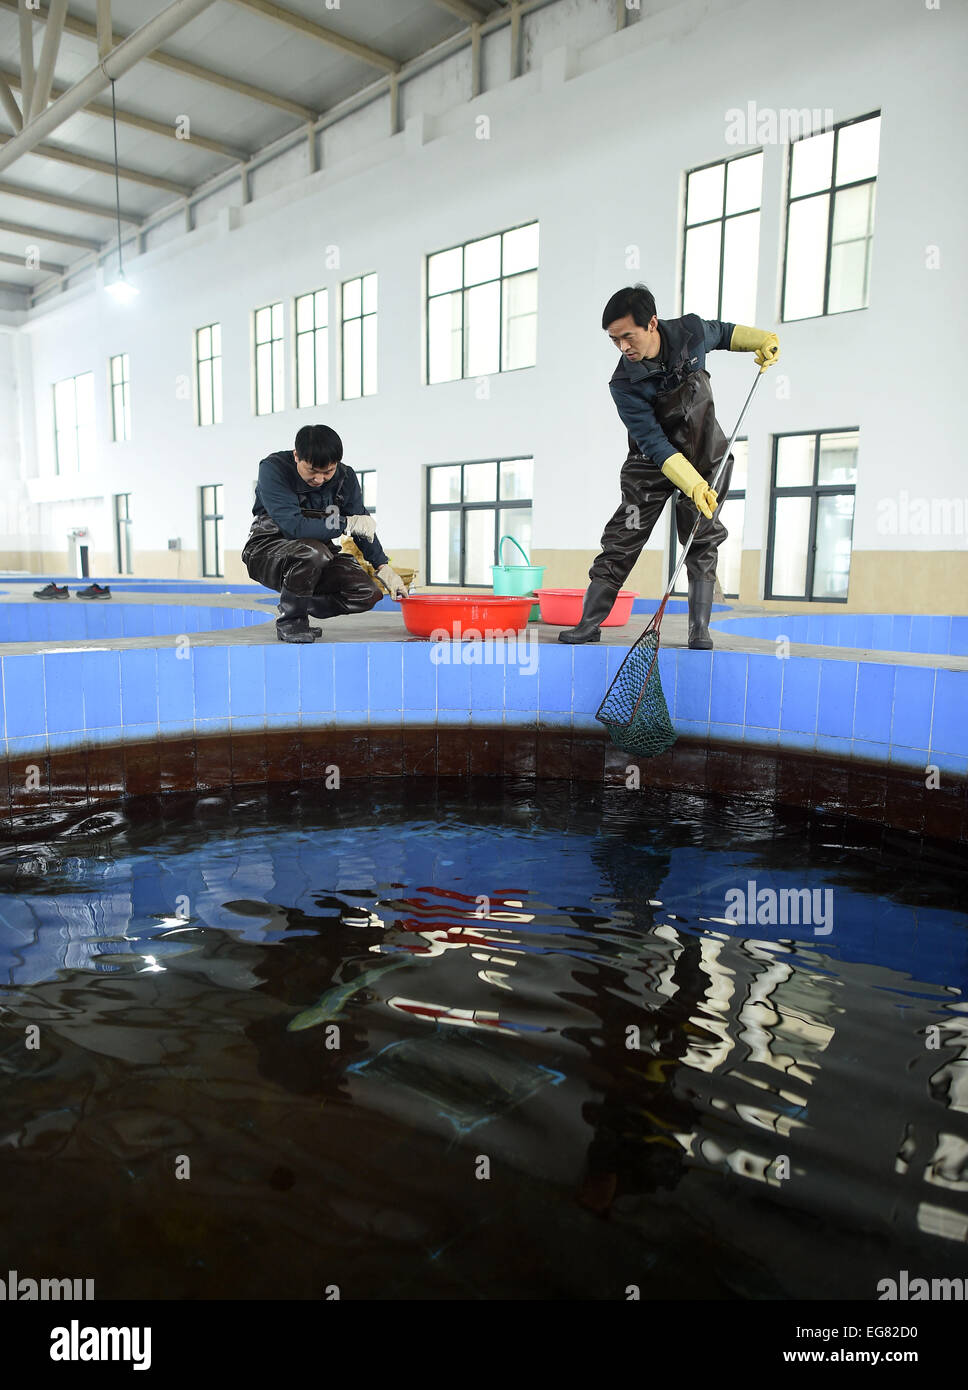 (150219) -- YICHANG, Feb. 19, 2015 (Xinhua) -- Breeders clean a tank for artificially-bred Chinese sturgeons at the Chinese Sturgeons Research Institute (CSRI) in Yichang, central China's Hubei Province, Feb. 19, 2015. Chinese sturgeons, nicknamed 'aquatic pandas', are listed as a wild creature under state protection. Researchers with CSRI succeeded in artificially inseminating and spawning a culture of sturgeons in 2009. Since then fish have been released into the river every year to save the species from extinction. At present, some 5,000 artificially-bred sturgeons live in the CSRI, which i Stock Photo